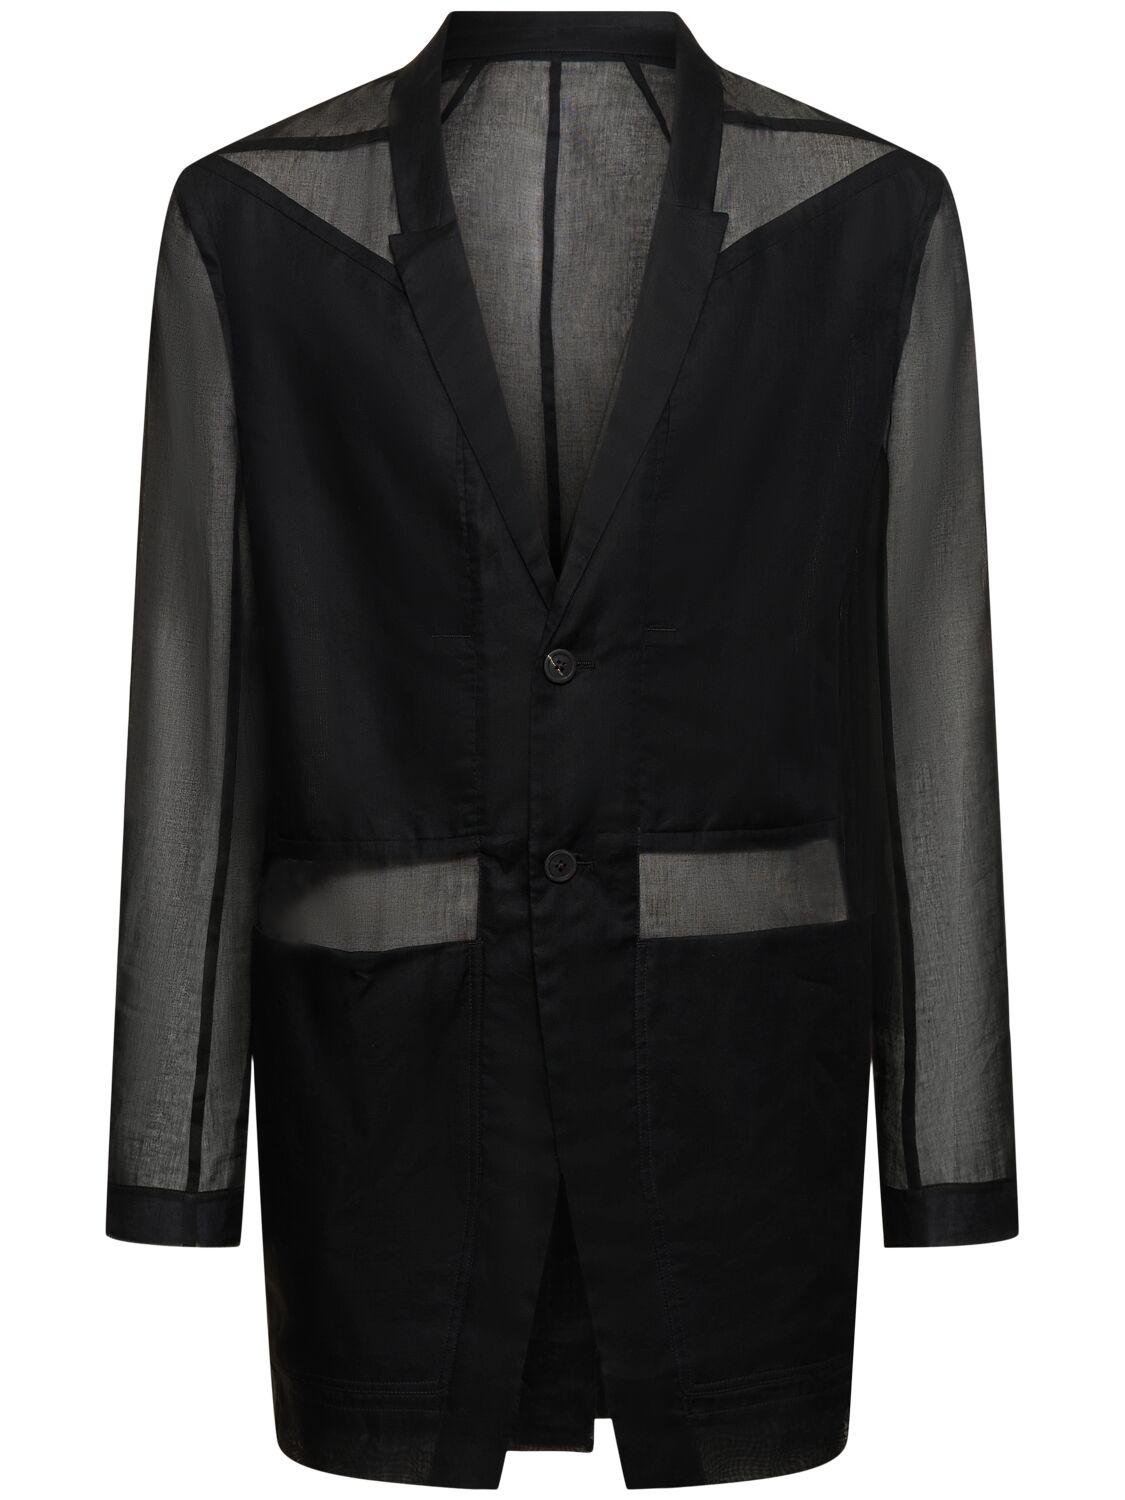 Lido Single Breasted Cotton Jacket by RICK OWENS